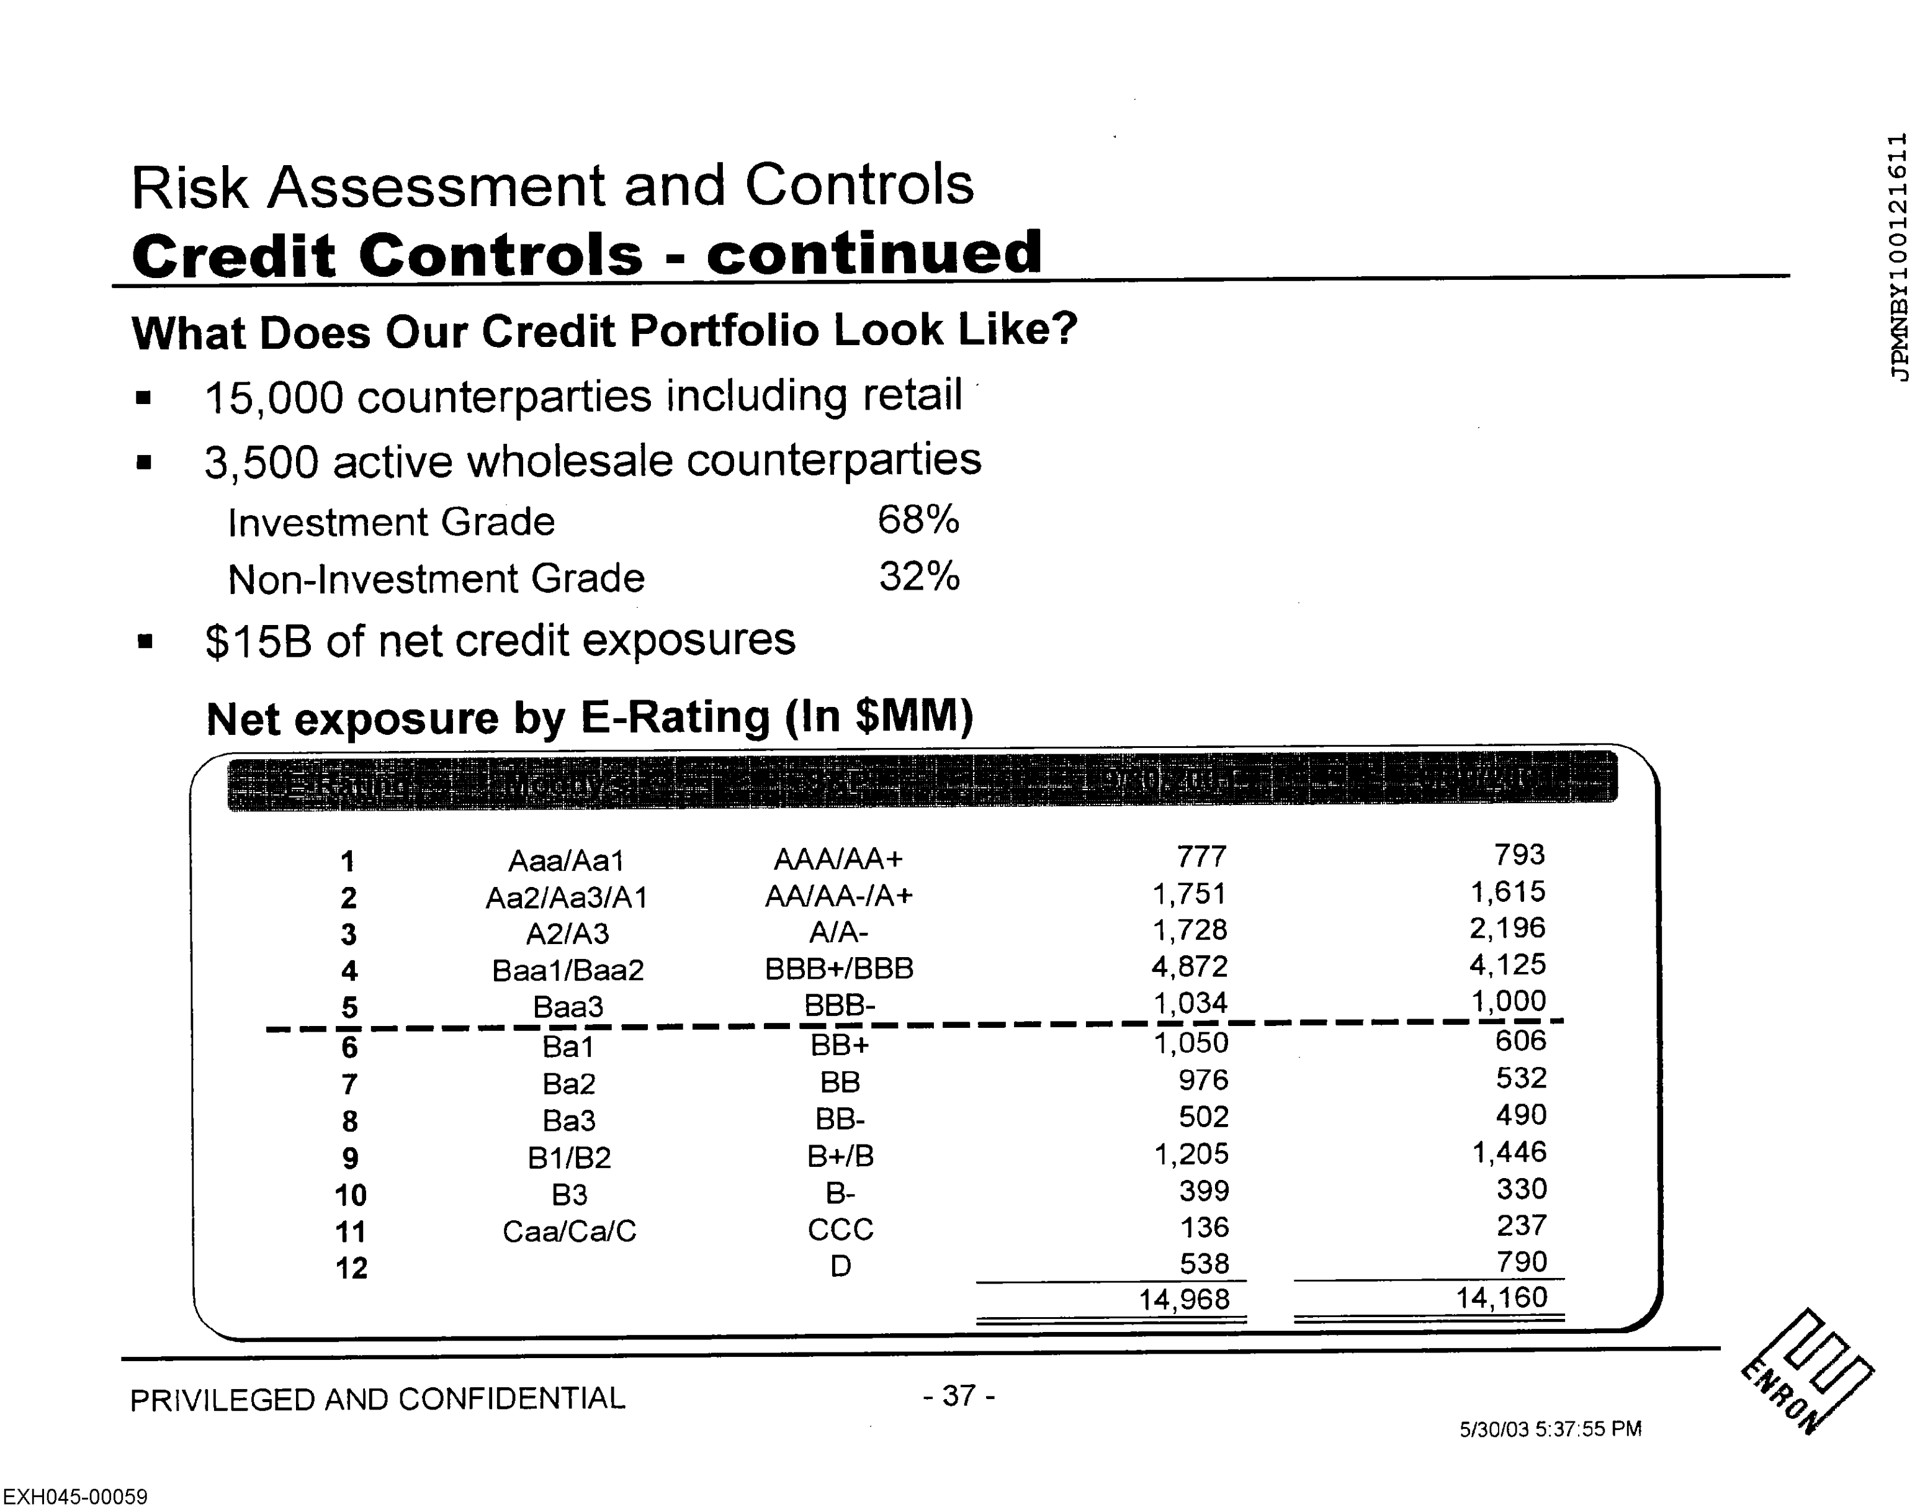 risk assessment and controls credit controls continued | Enron